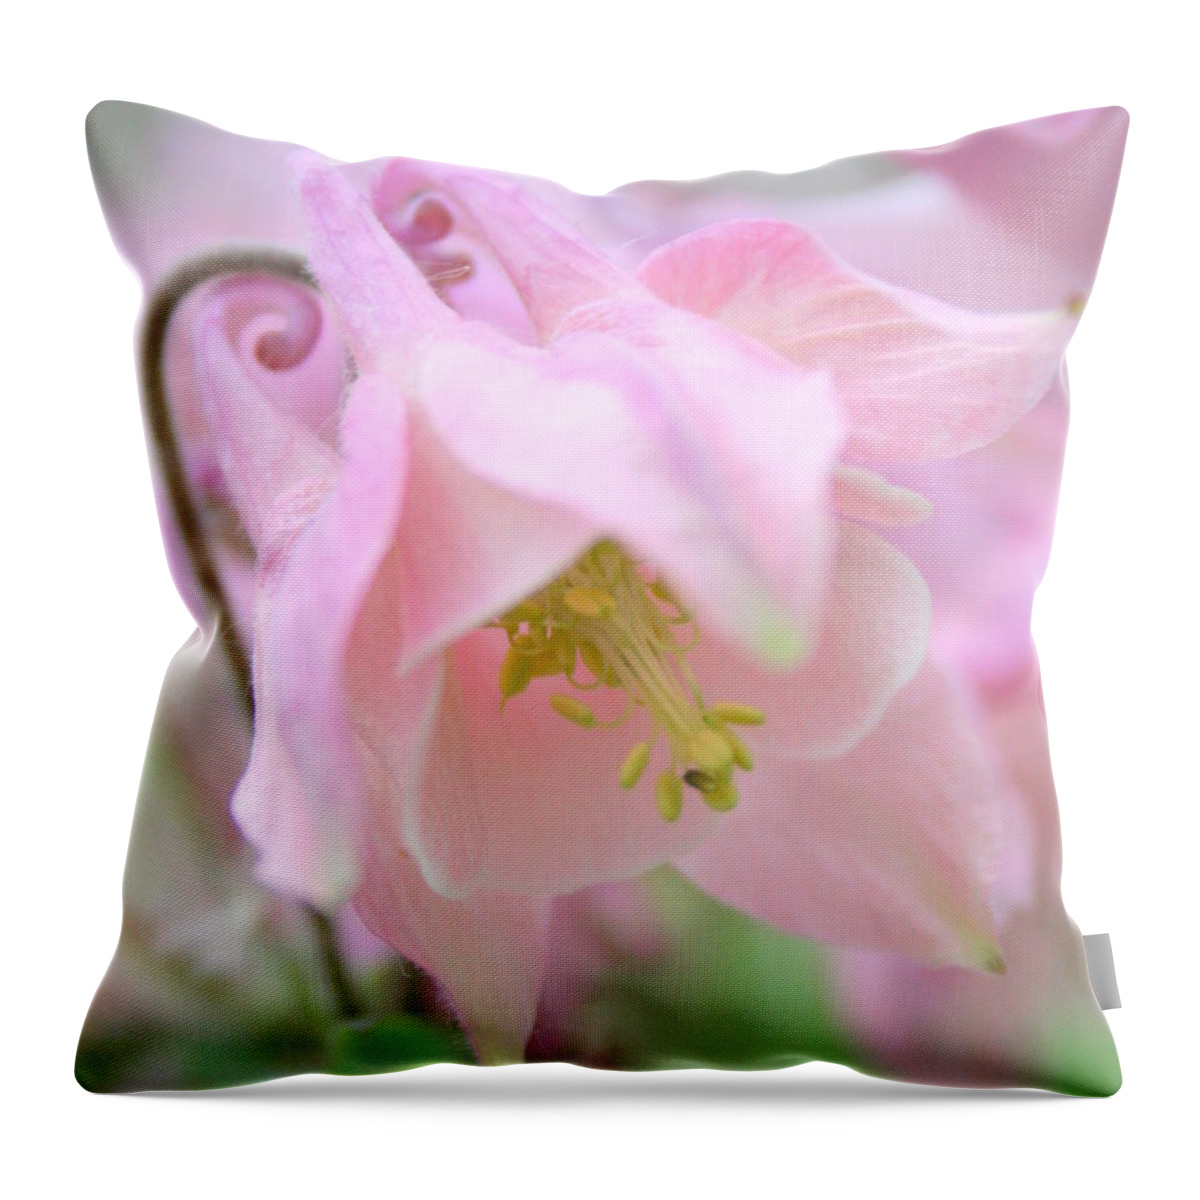 Flower Throw Pillow featuring the photograph Cotton Candy by Julie Lueders 